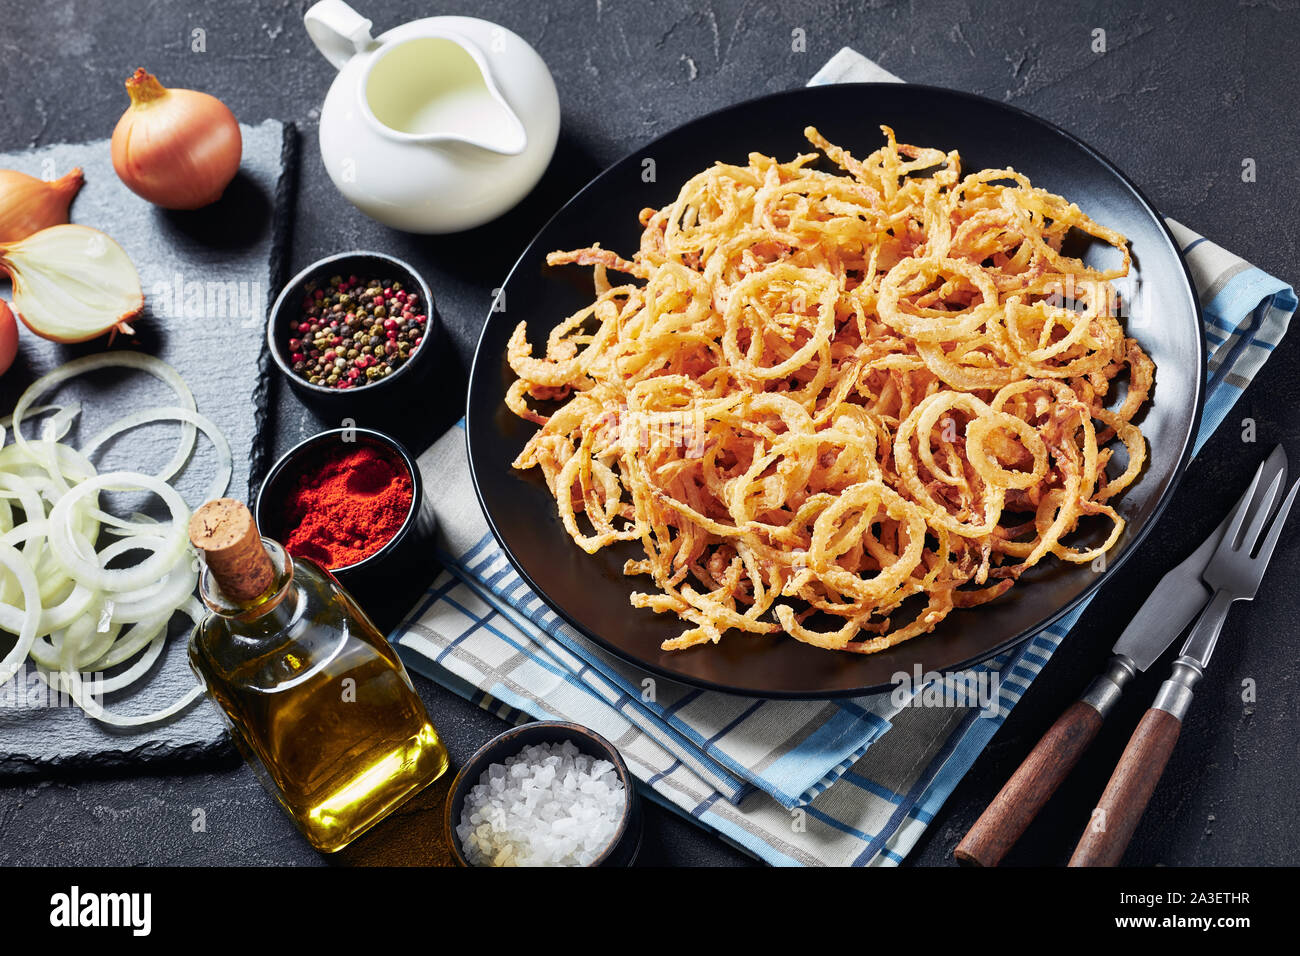 close-up of crispy fried onion rings and strings with crunchy coating on a black plate on a concrete table with ingredients, view from above Stock Photo